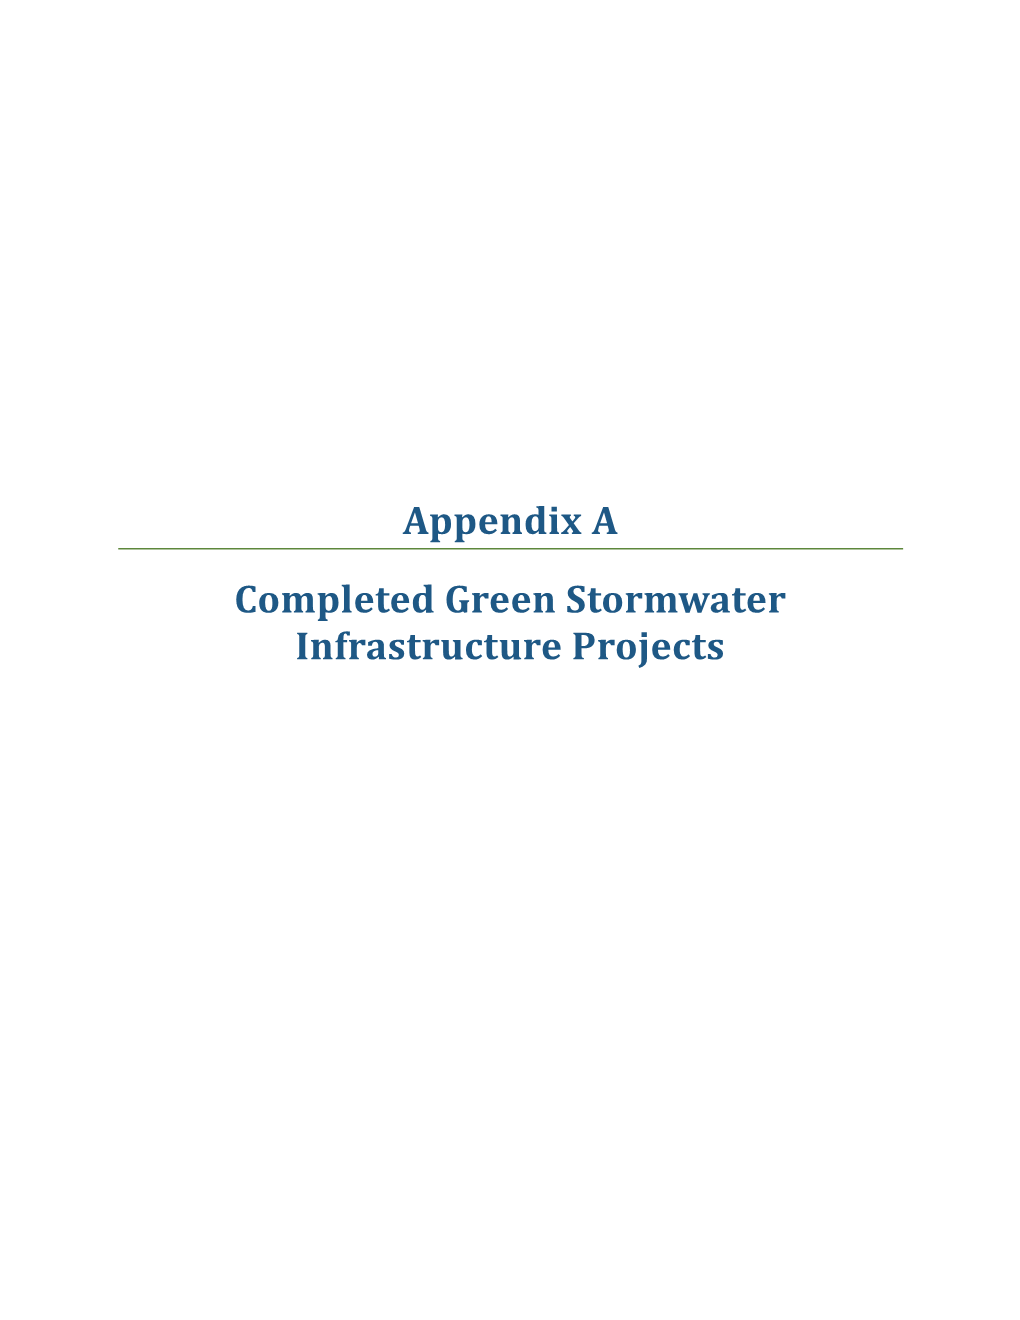 Appendix a Completed Green Stormwater Infrastructure Projects